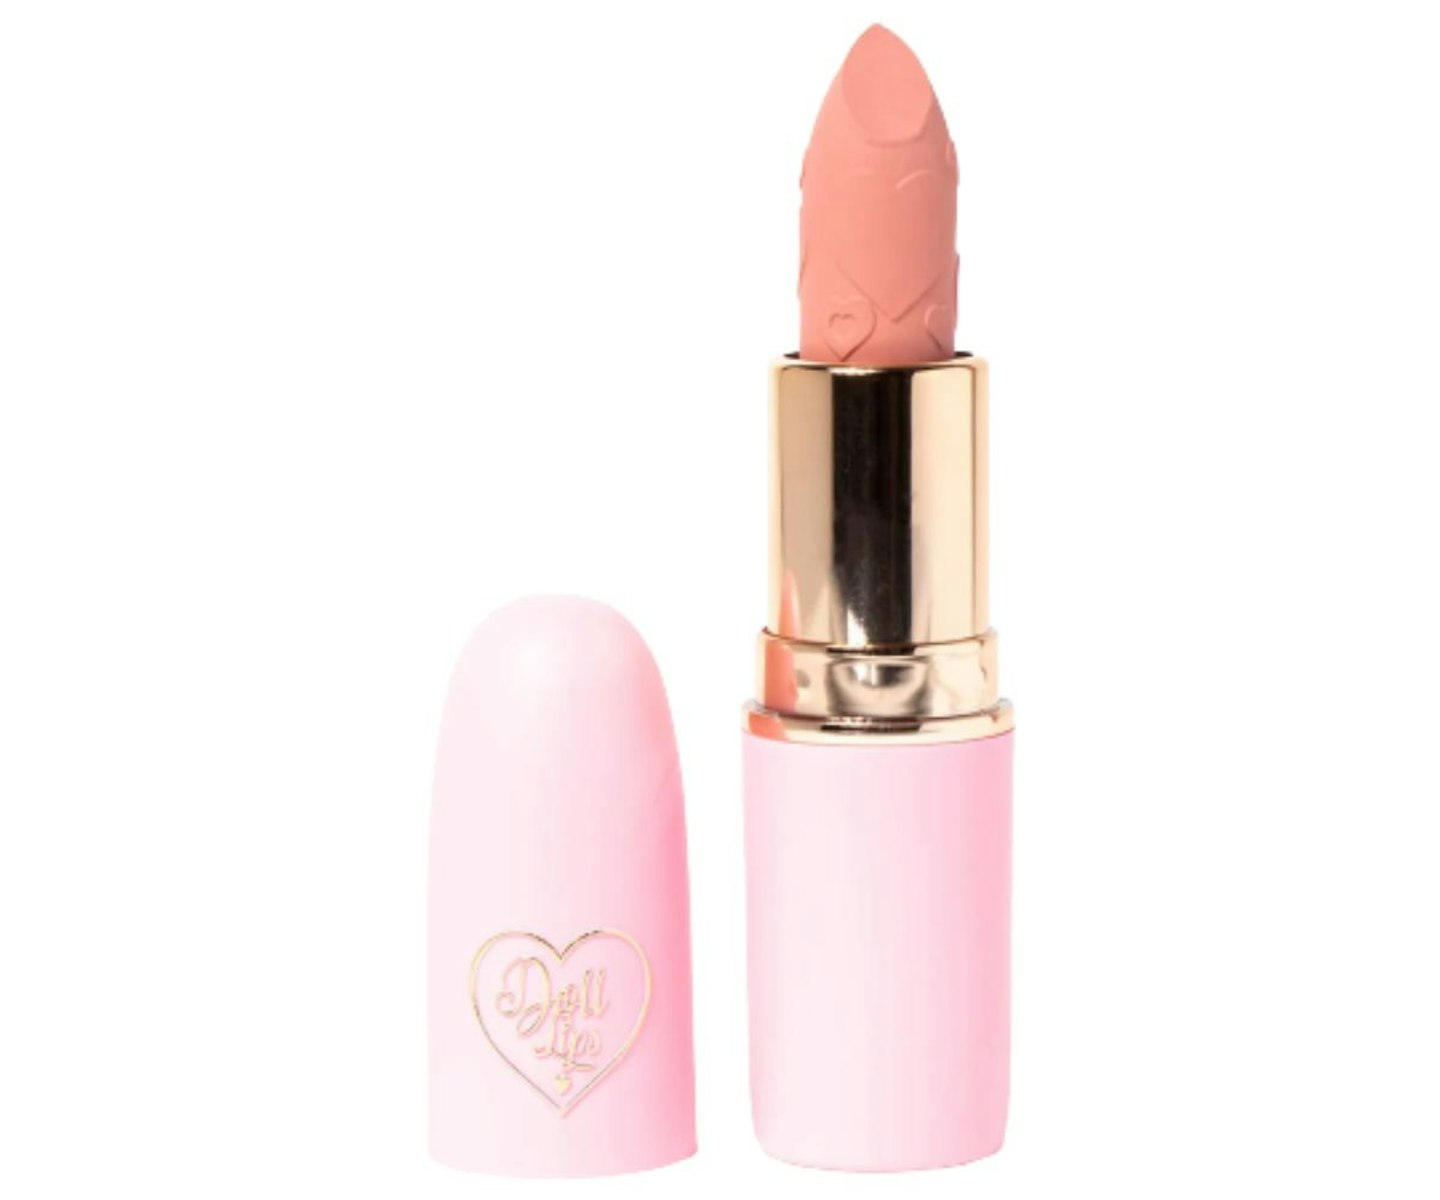 Doll Beauty Lipstick - Dolled Out